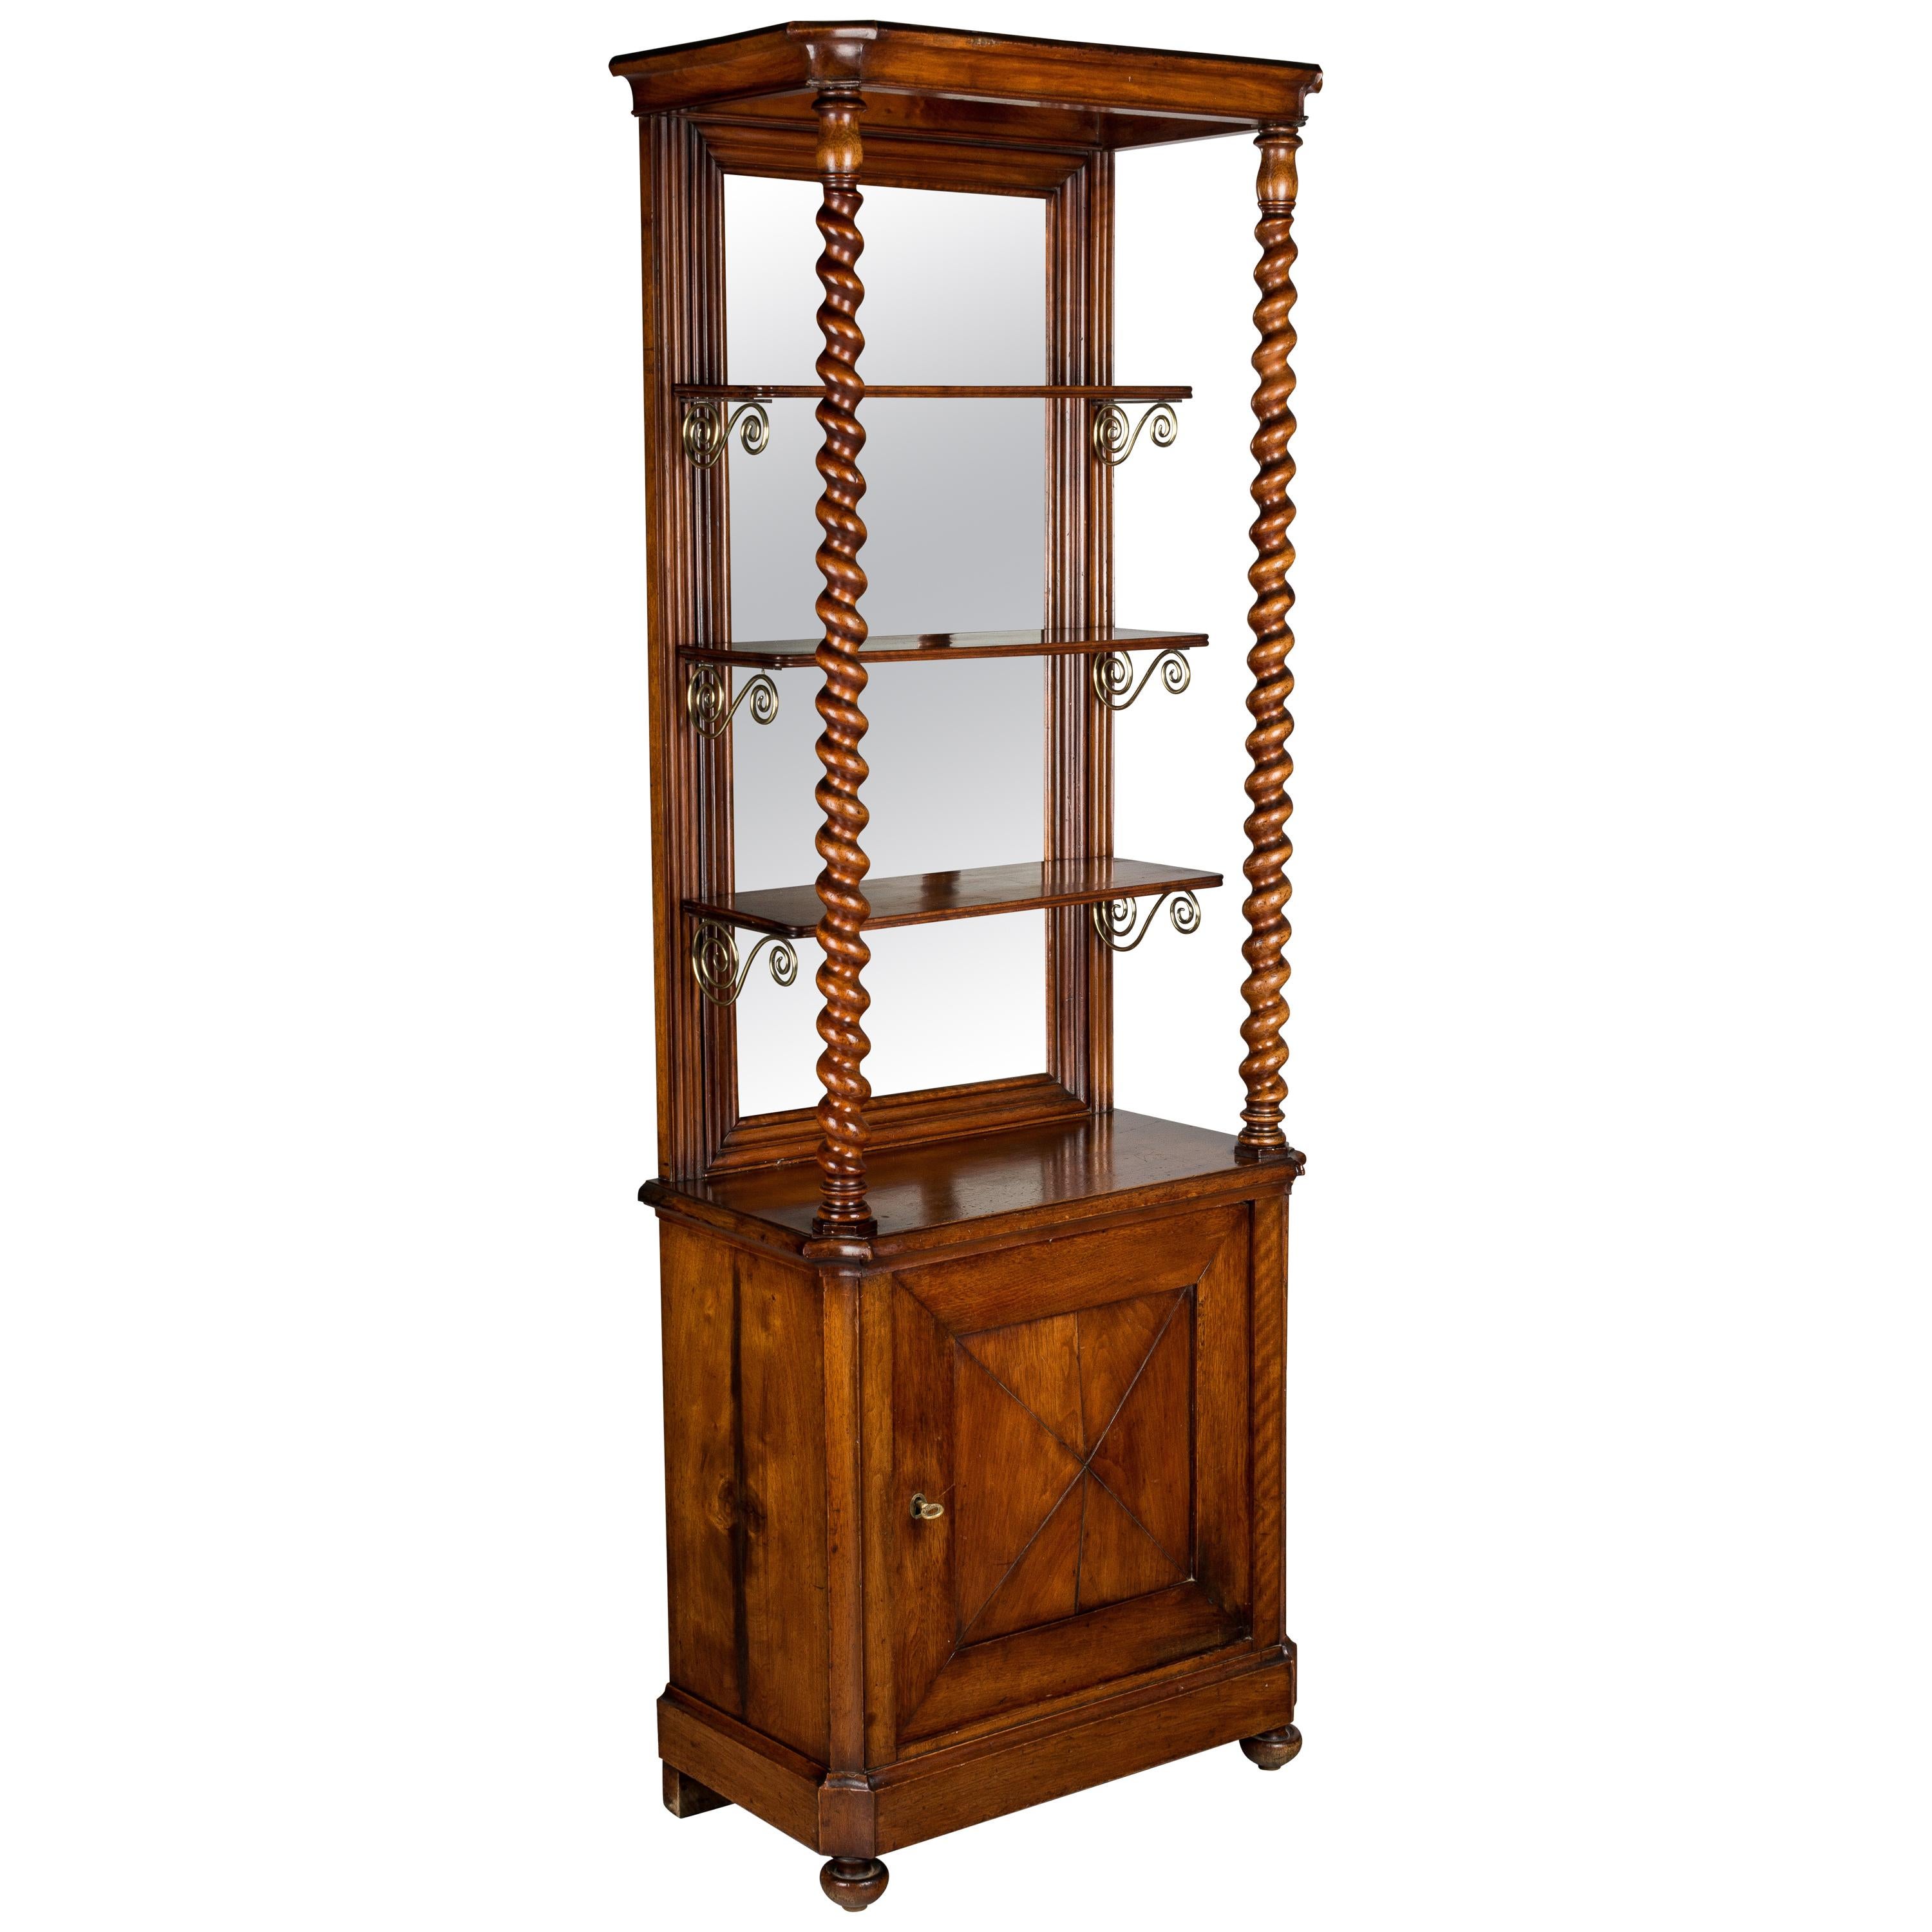 19th Century French Mahogany Cabinet with Shelves